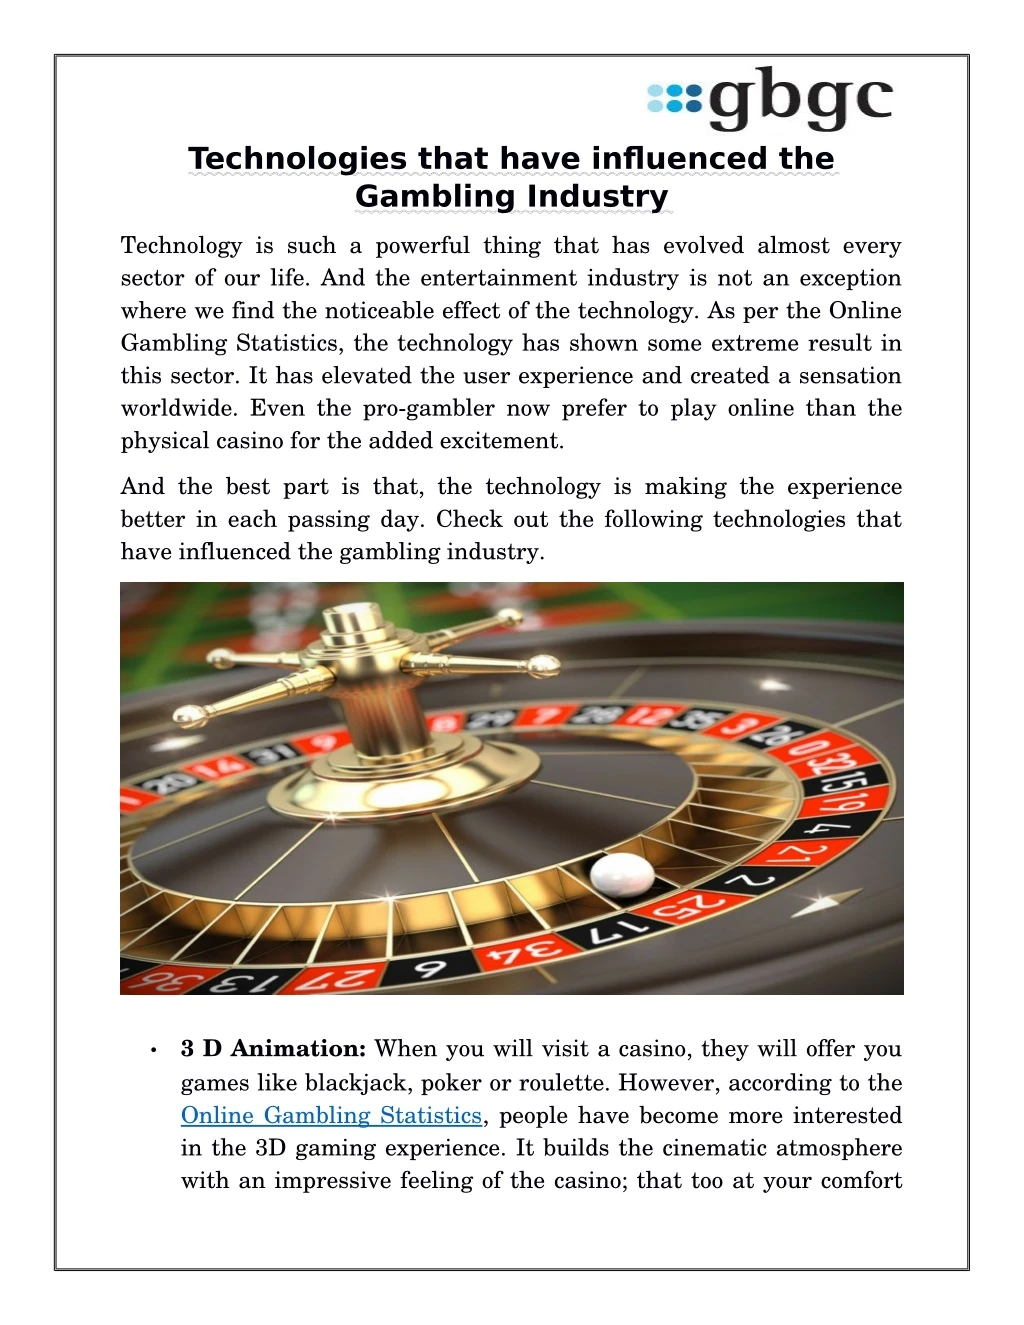 technologies that have influenced the gambling